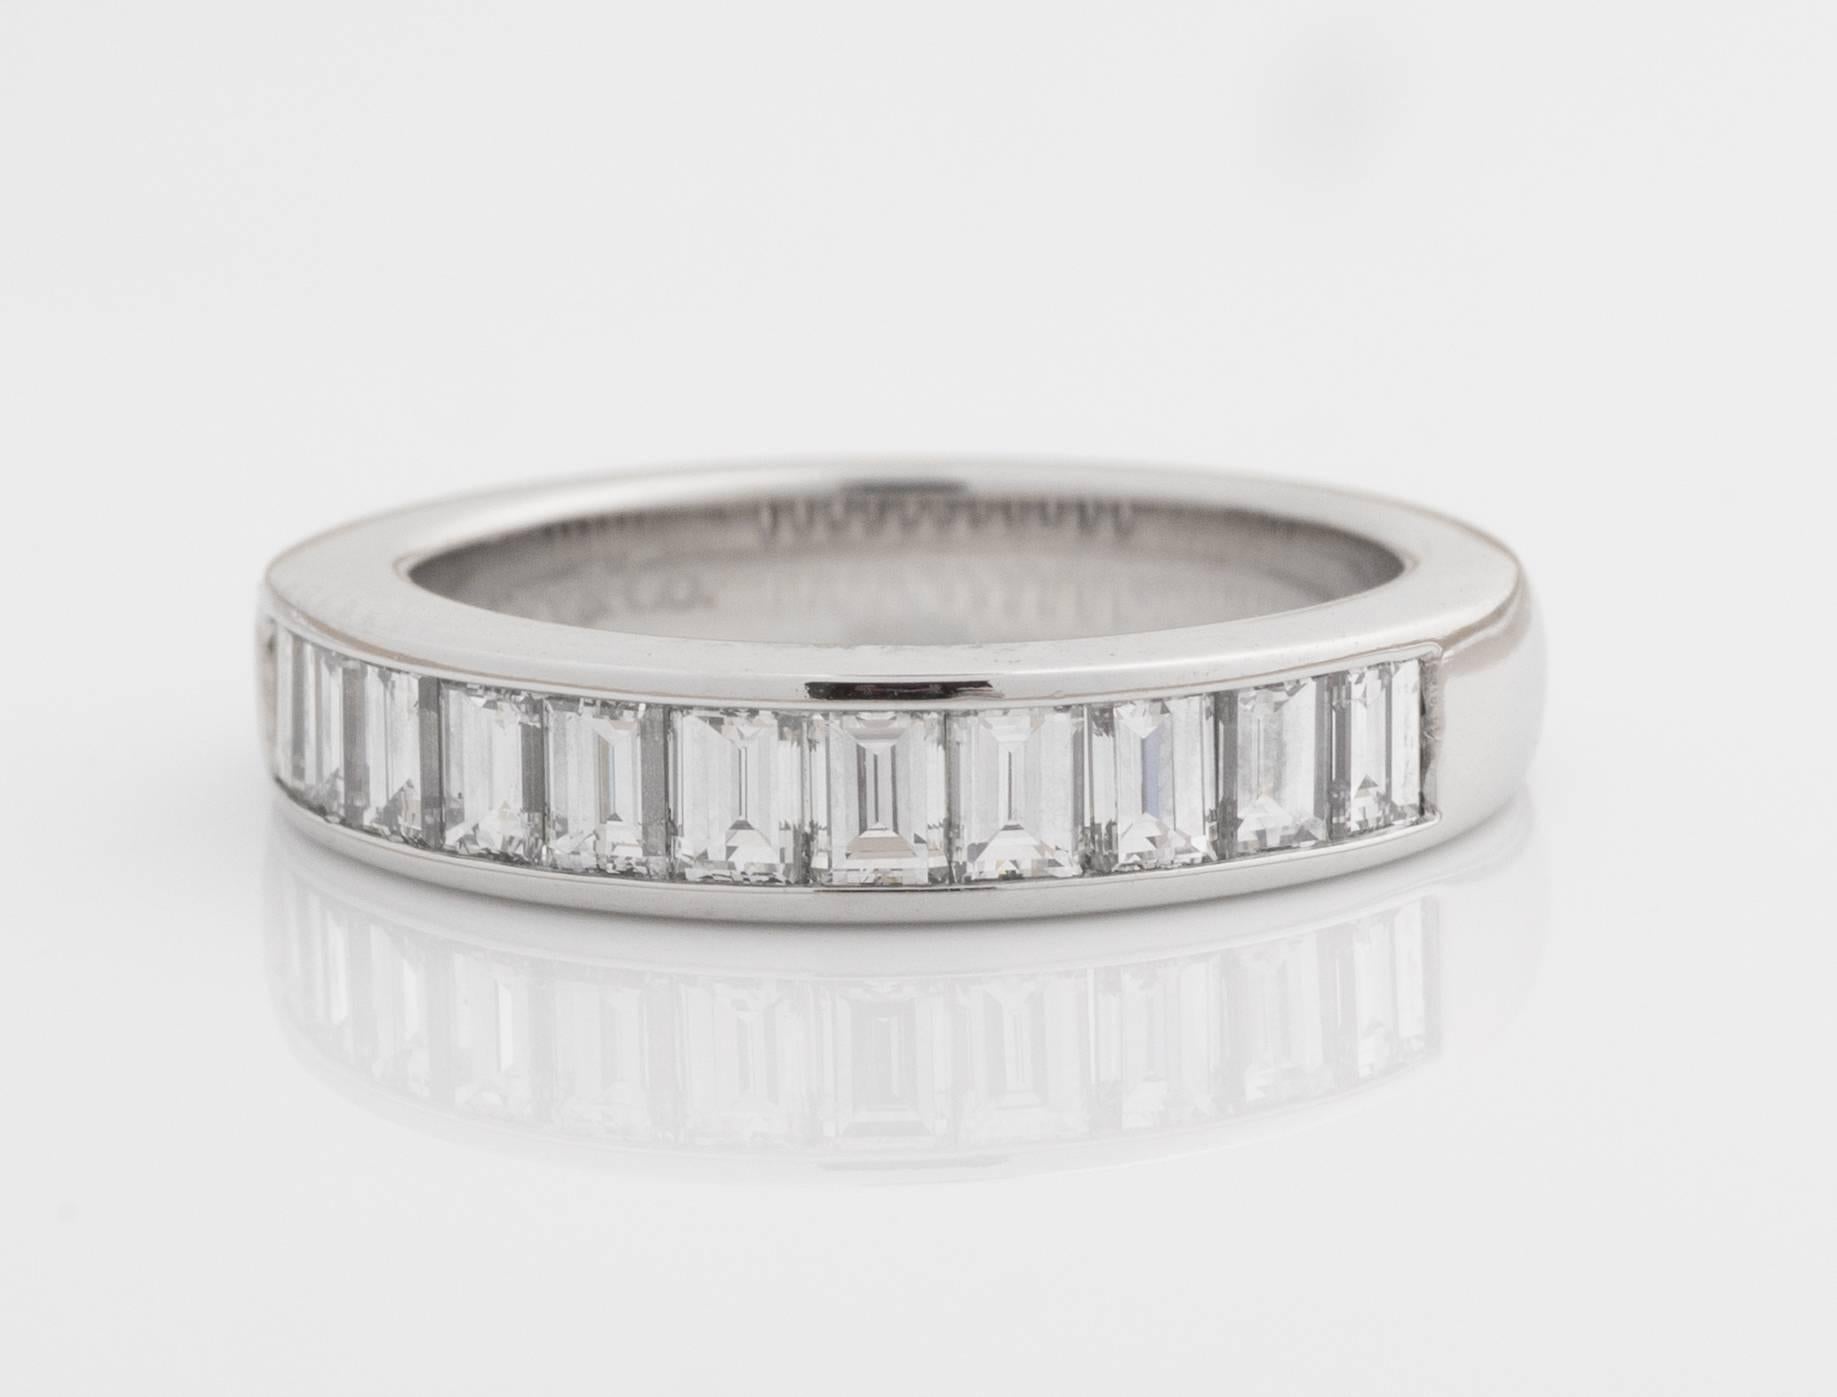 Tiffany and Co. Diamond Band

Features 1.0 carat total weight Baguette Diamonds, Channel Set in Platinum. Diamonds cover the front half of the ring. The back half of the shank is smooth for wearing comfort.

This Stunning Diamond Ring fits a size 4